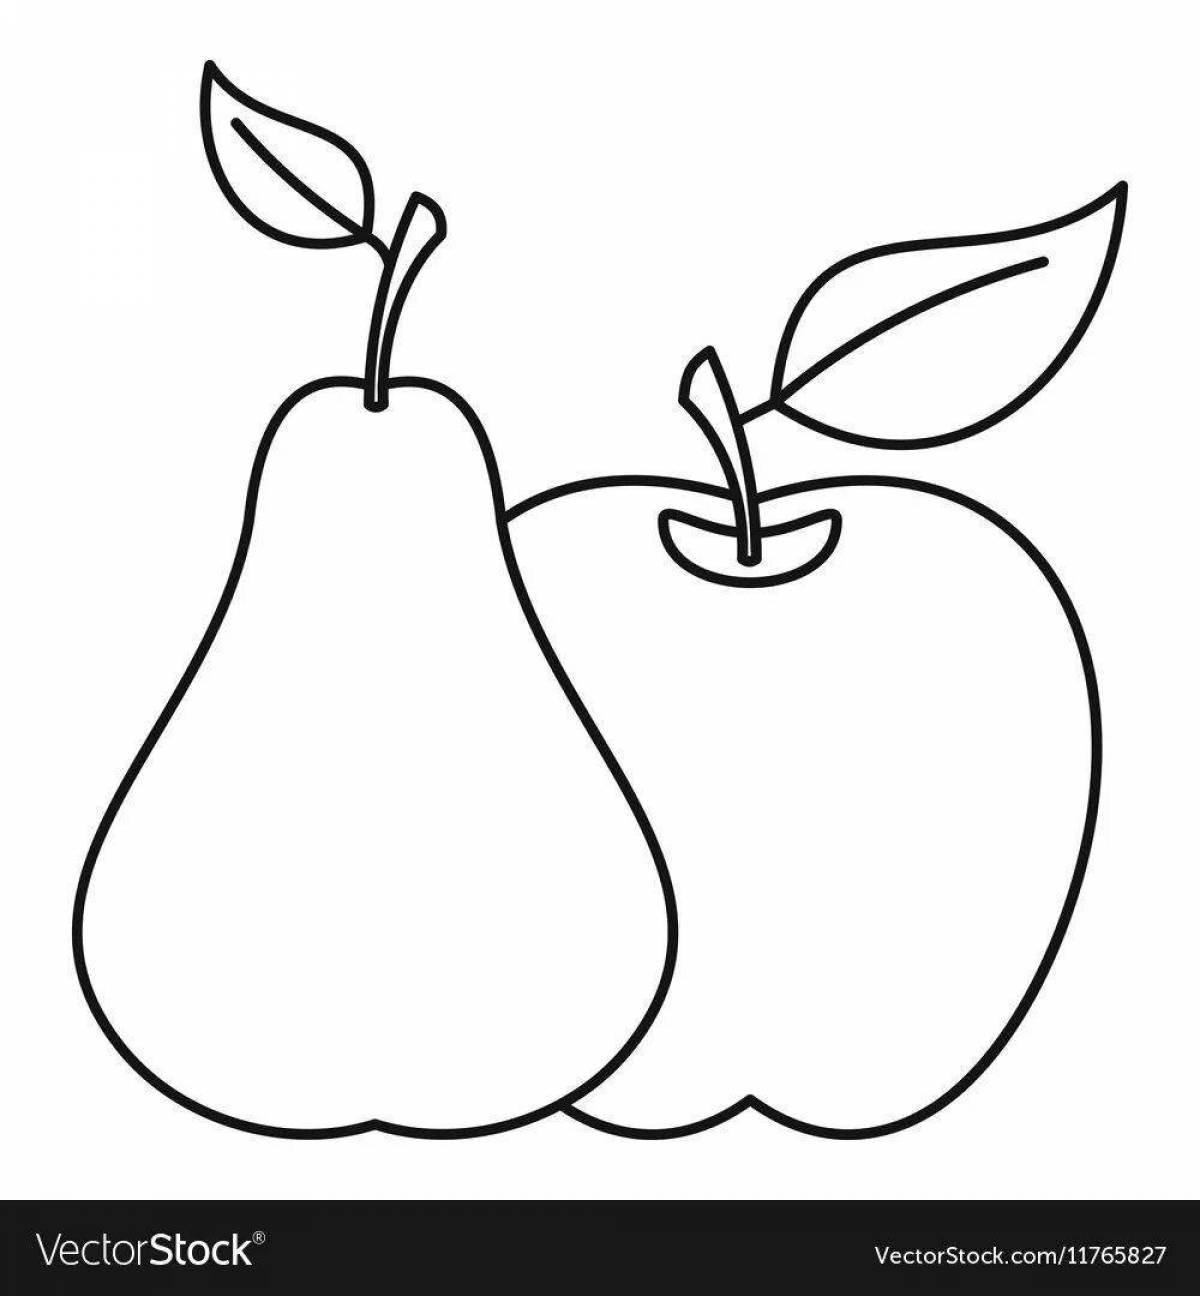 Funny pear coloring book for children 3-4 years old